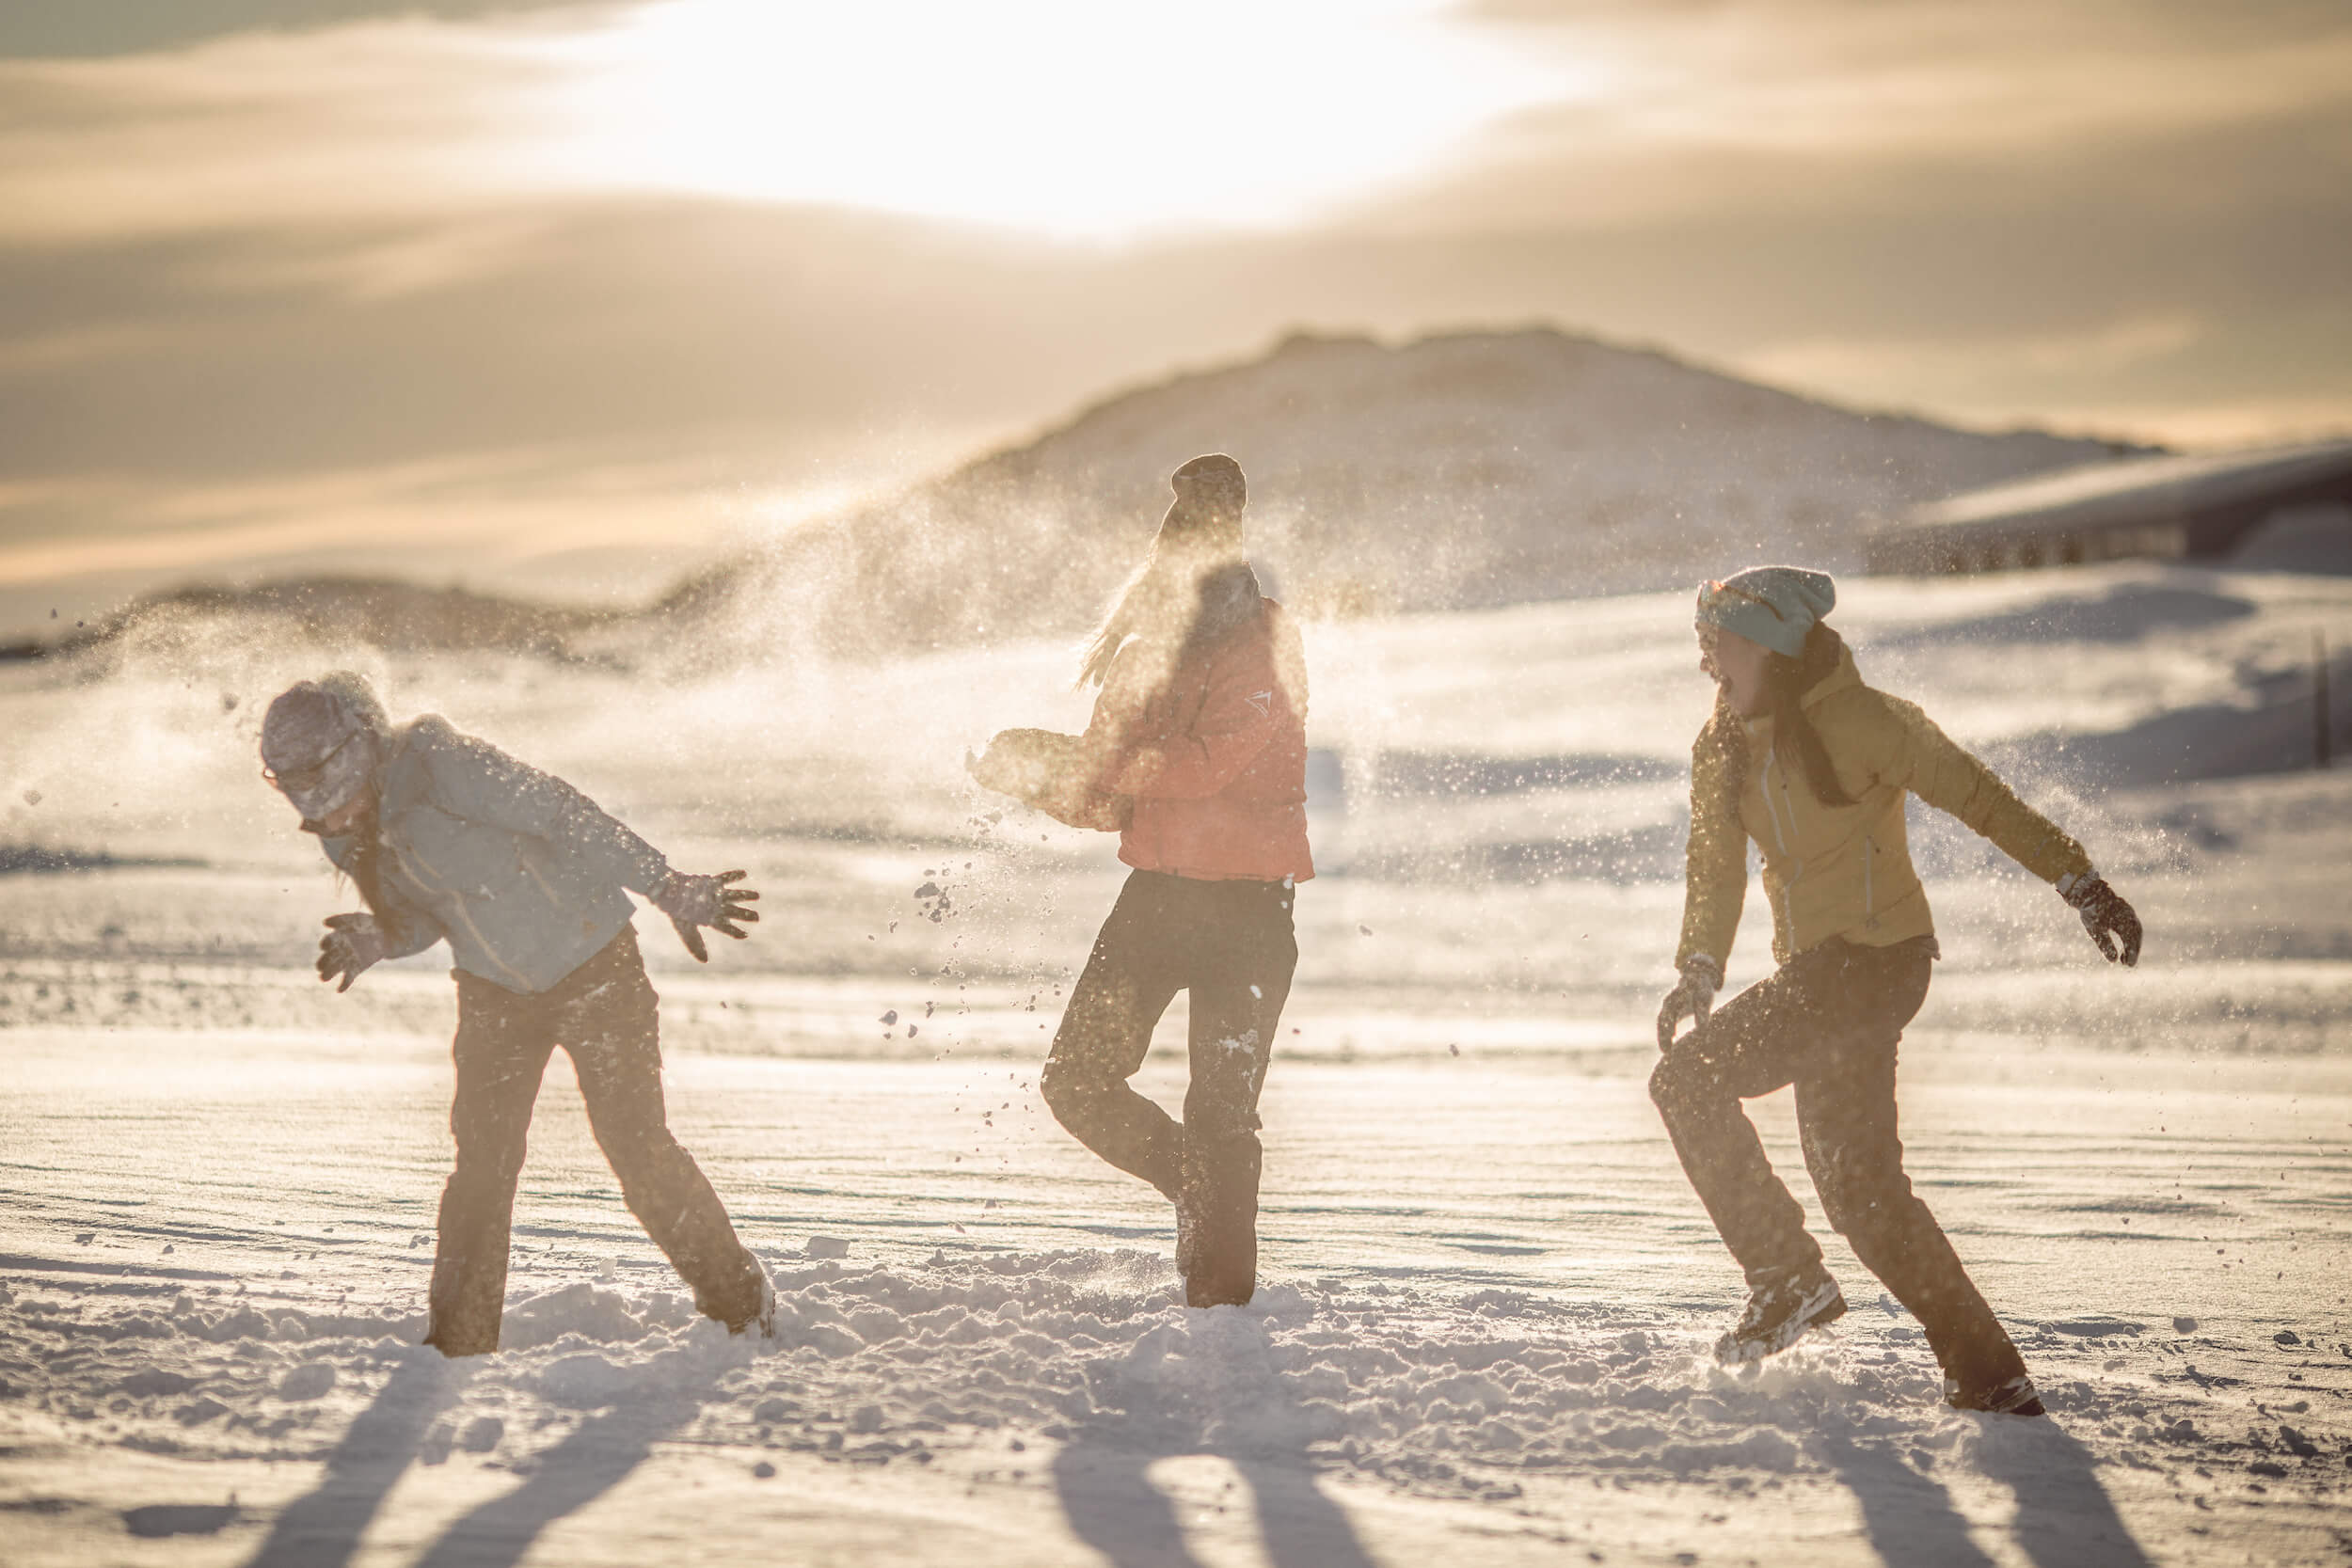 A sunset snowball fight in Kulusuk in East Greenland. Photo by Mads Pihl